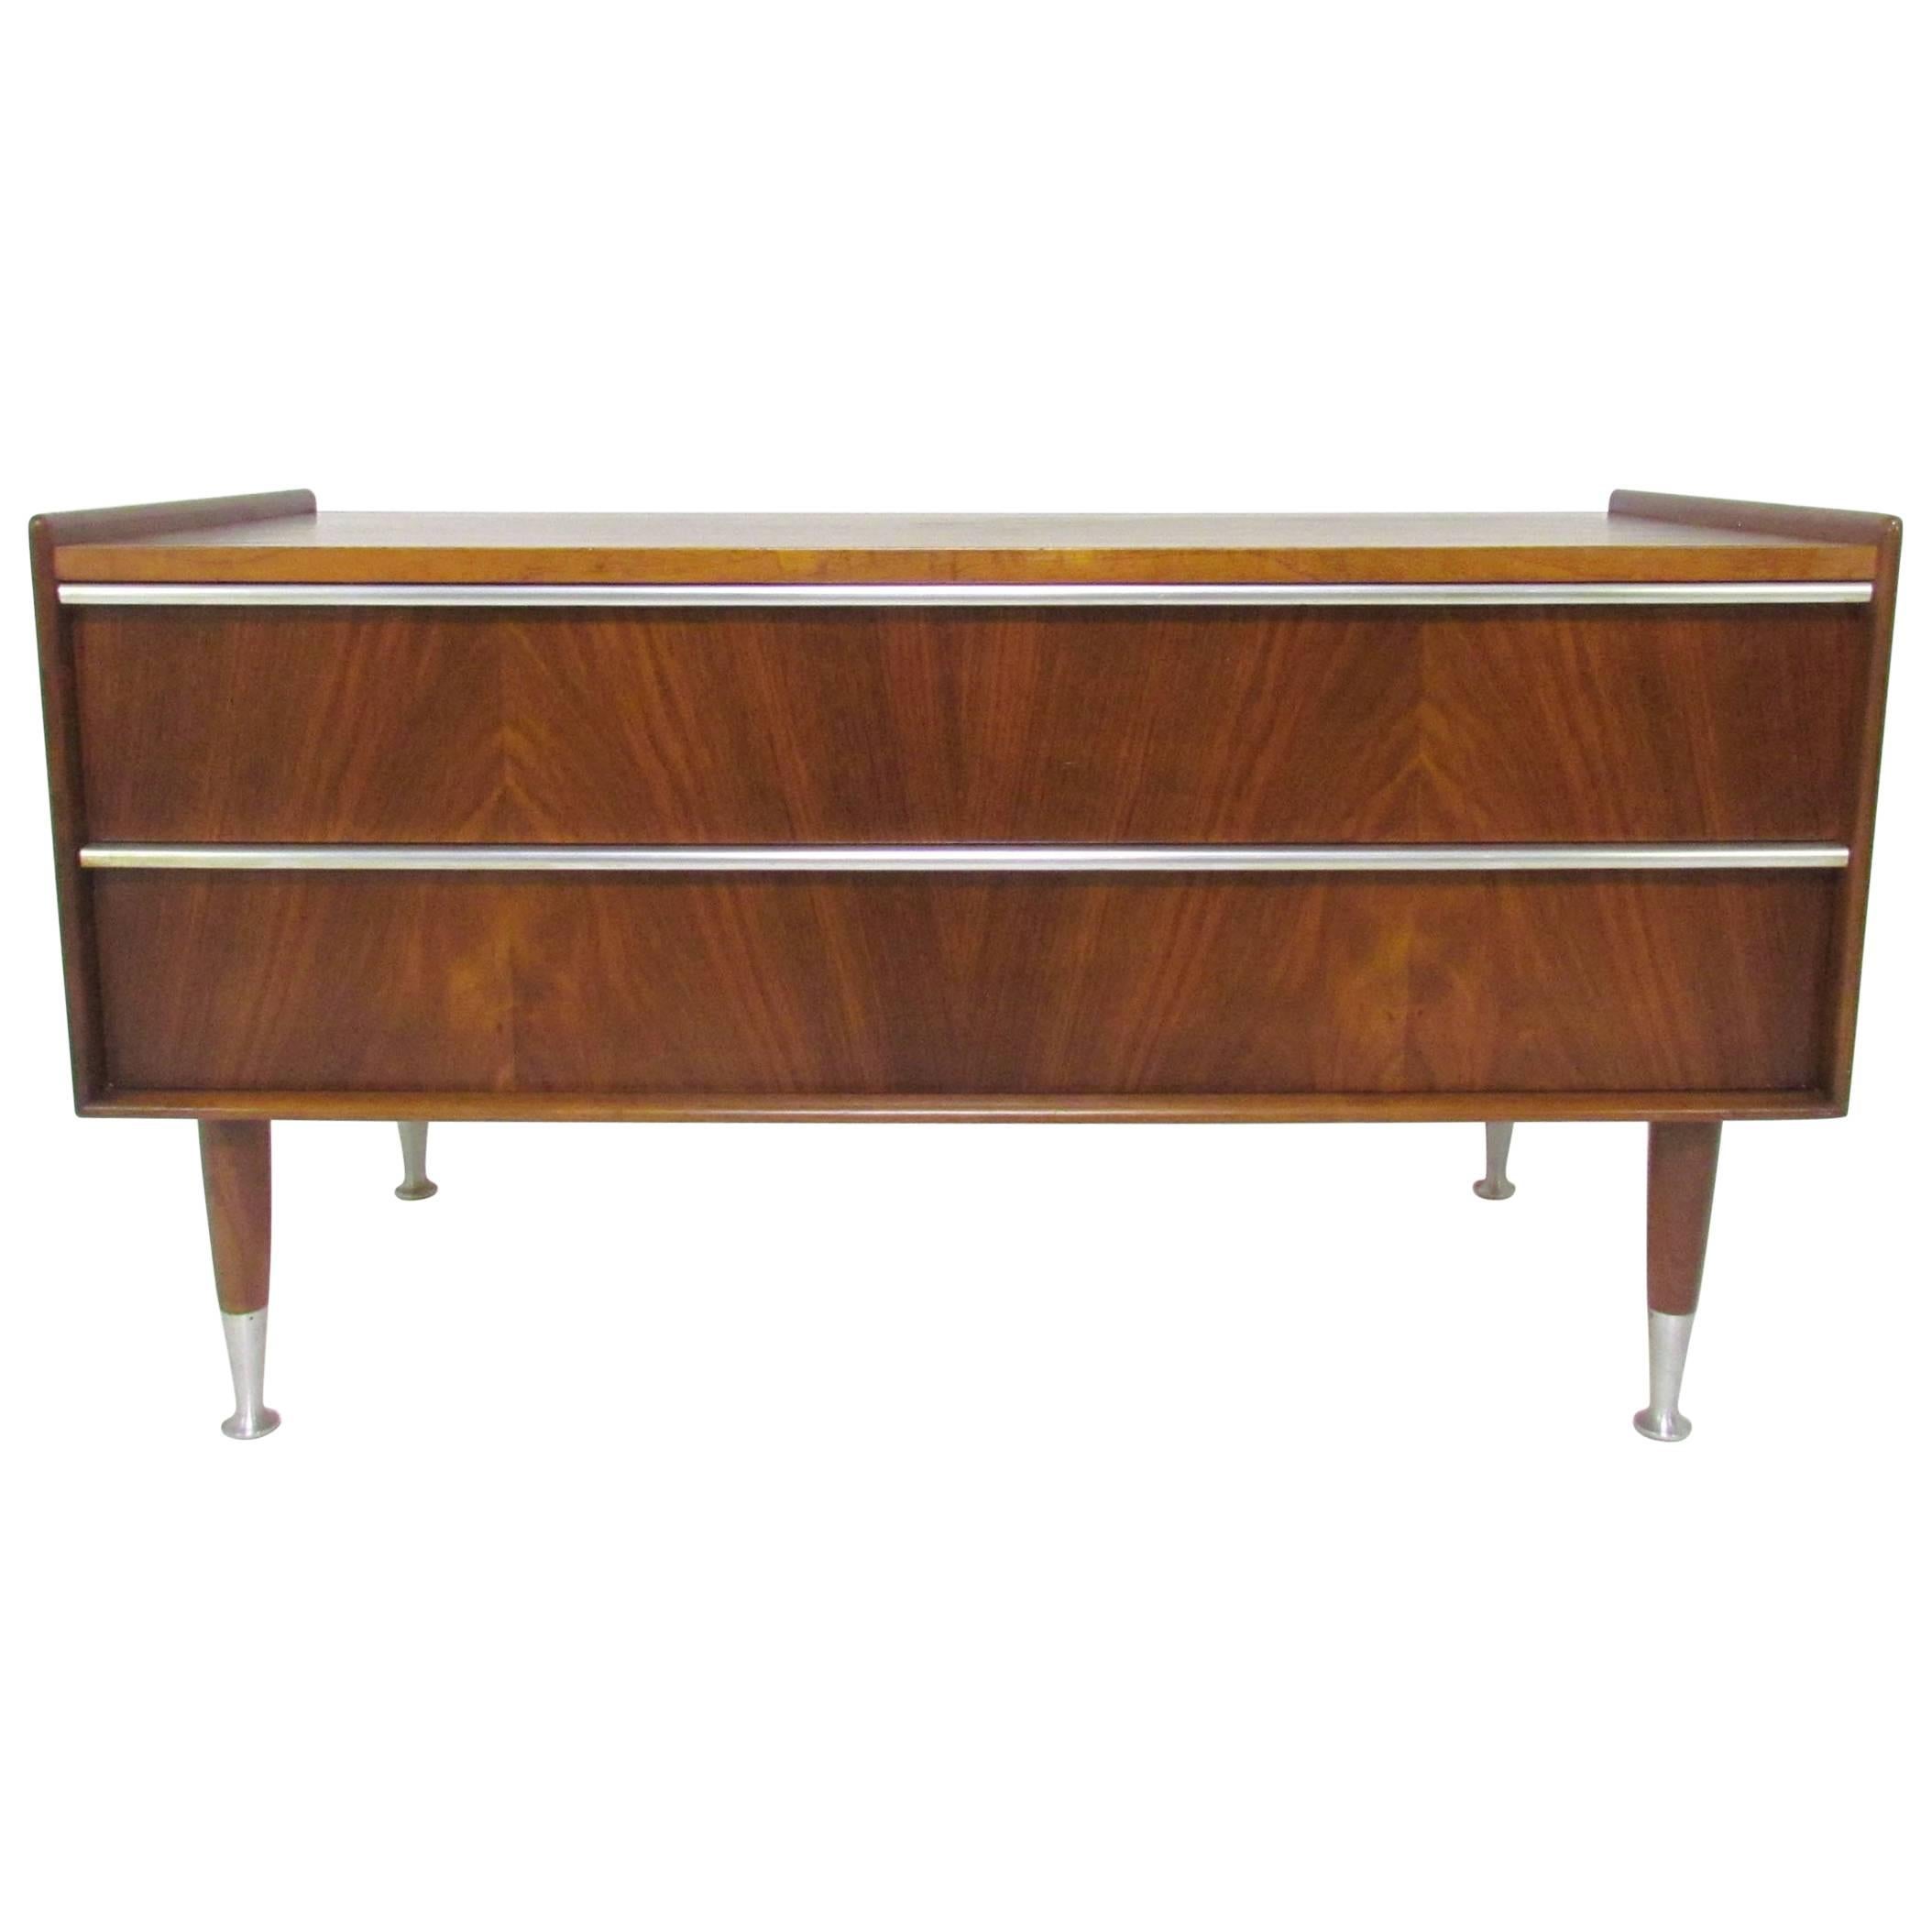 Mid-Century Modern Blanket Chest/Bench in Walnut and Aluminium by Edmond Spence